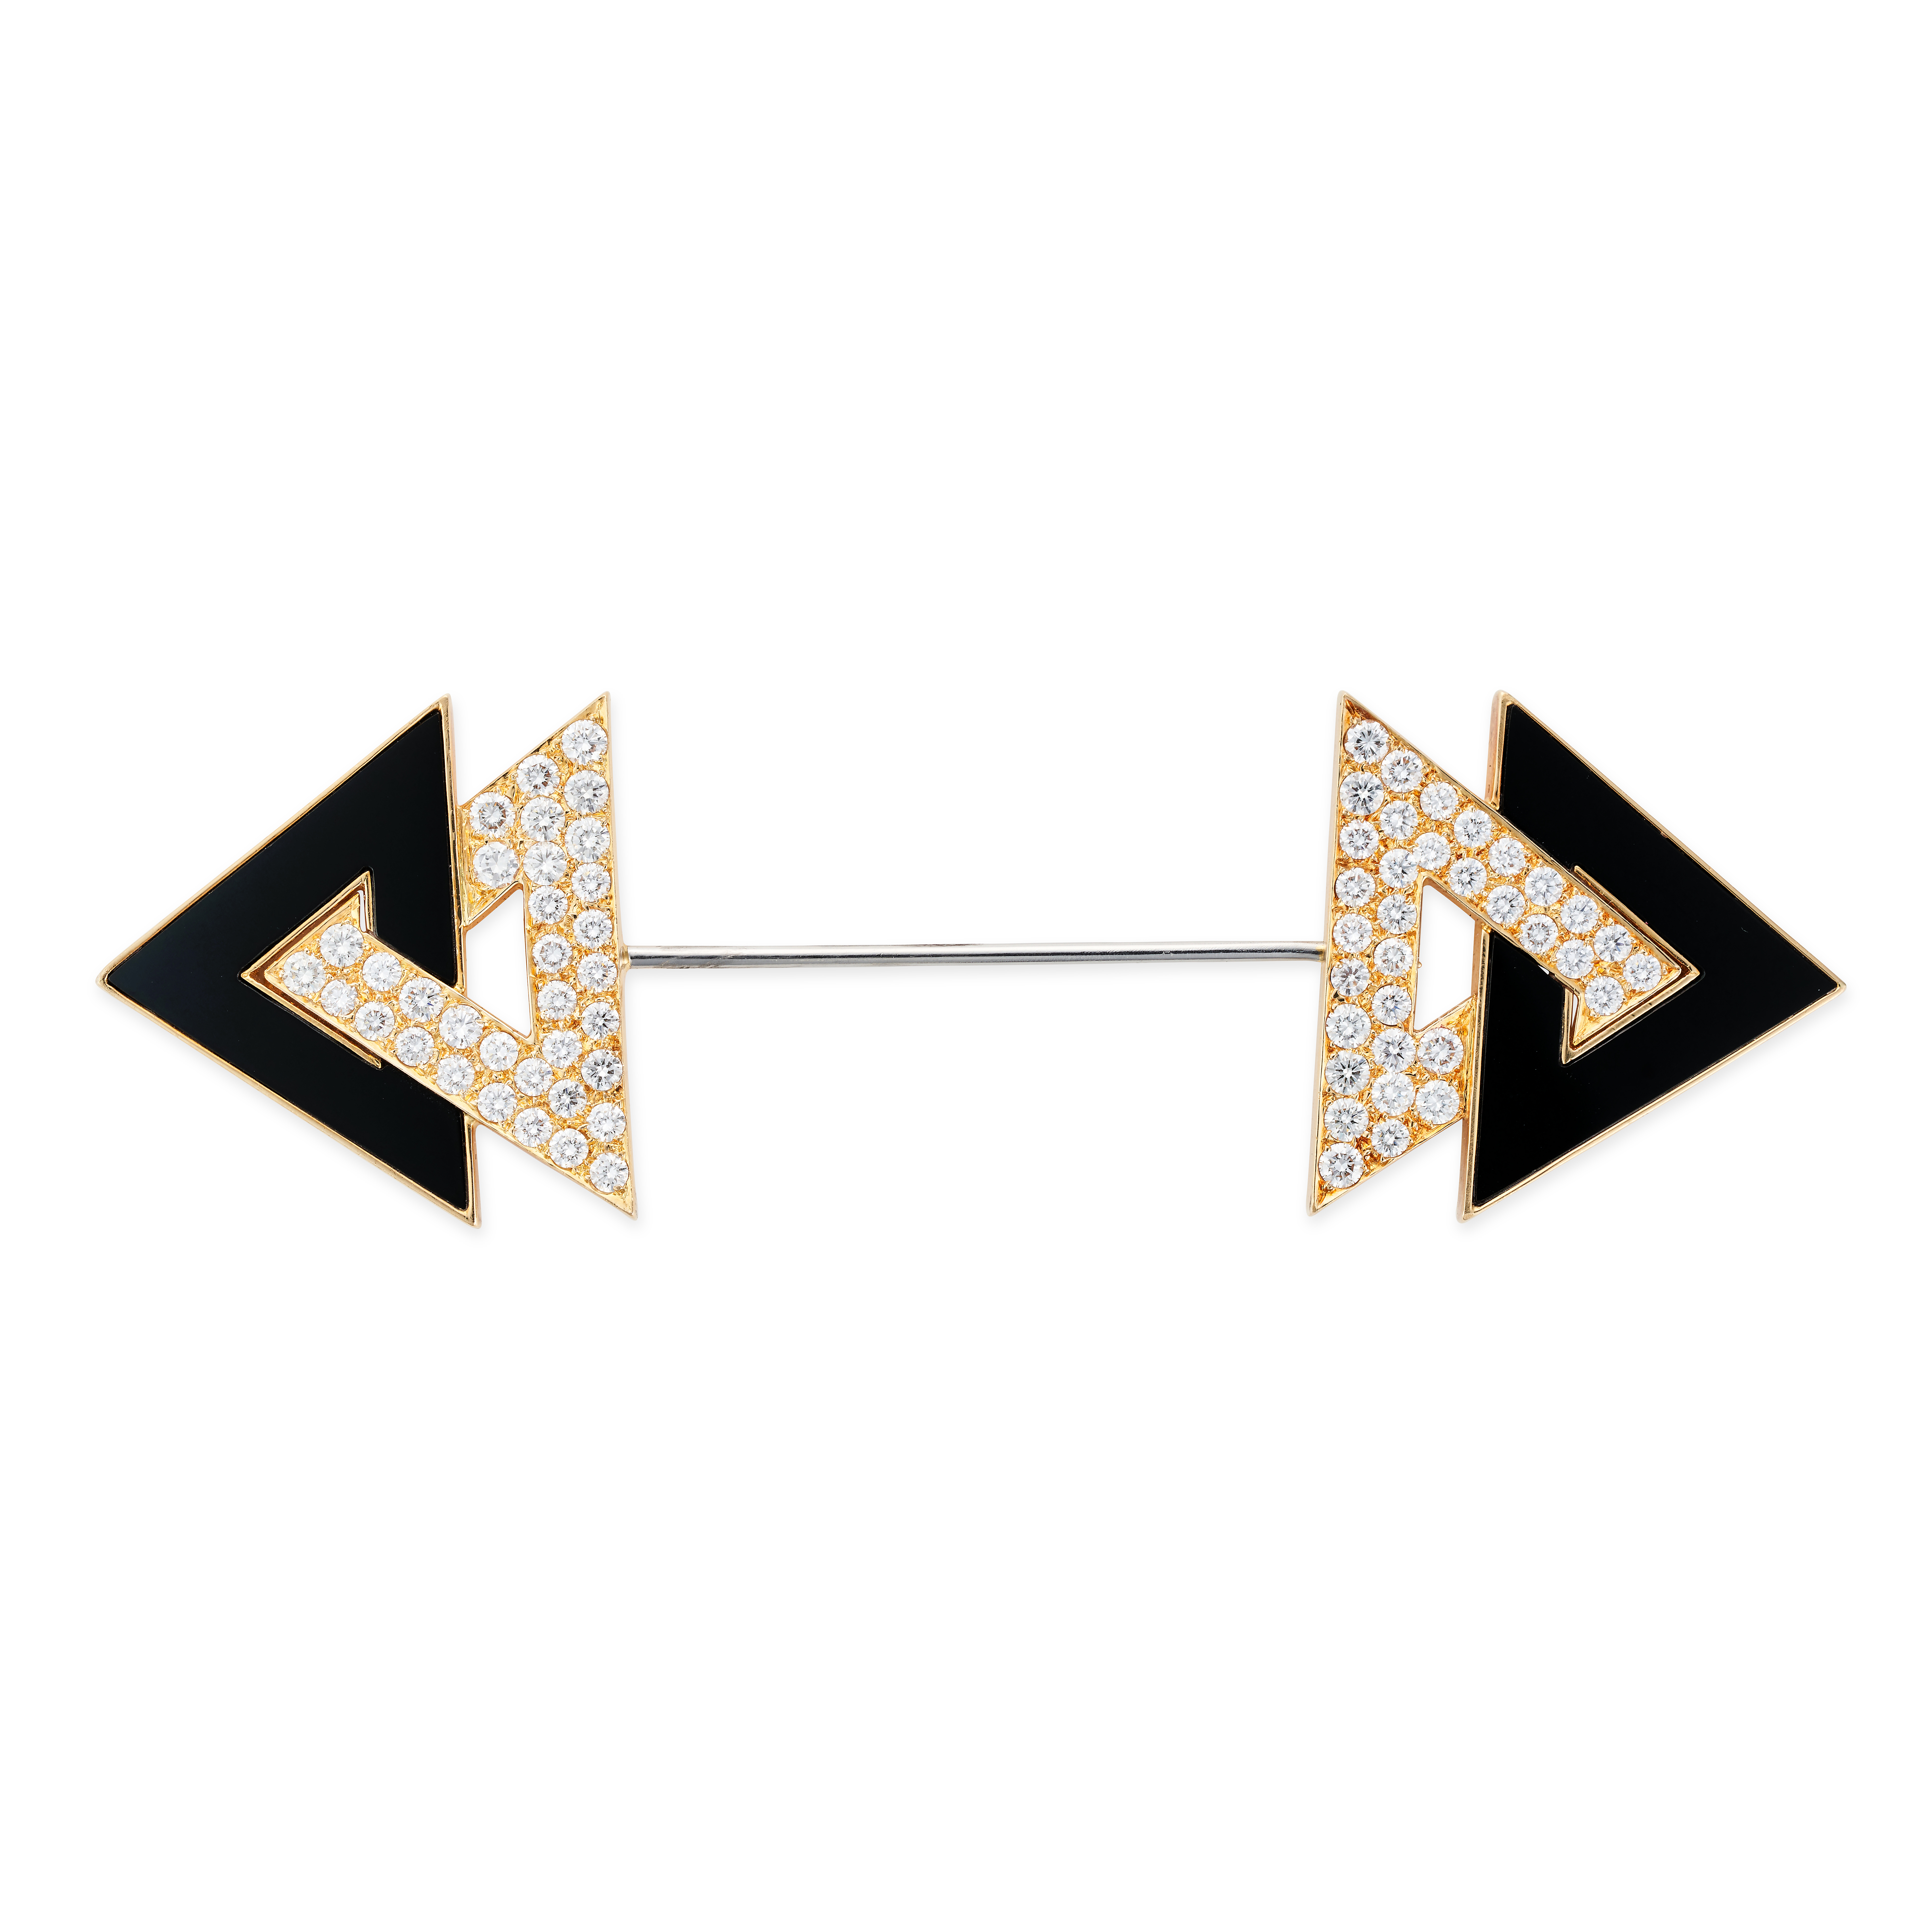 A DIAMOND AND ONYX JABOT PIN BROOCH terminating at each end with a double arrow head, set with po...